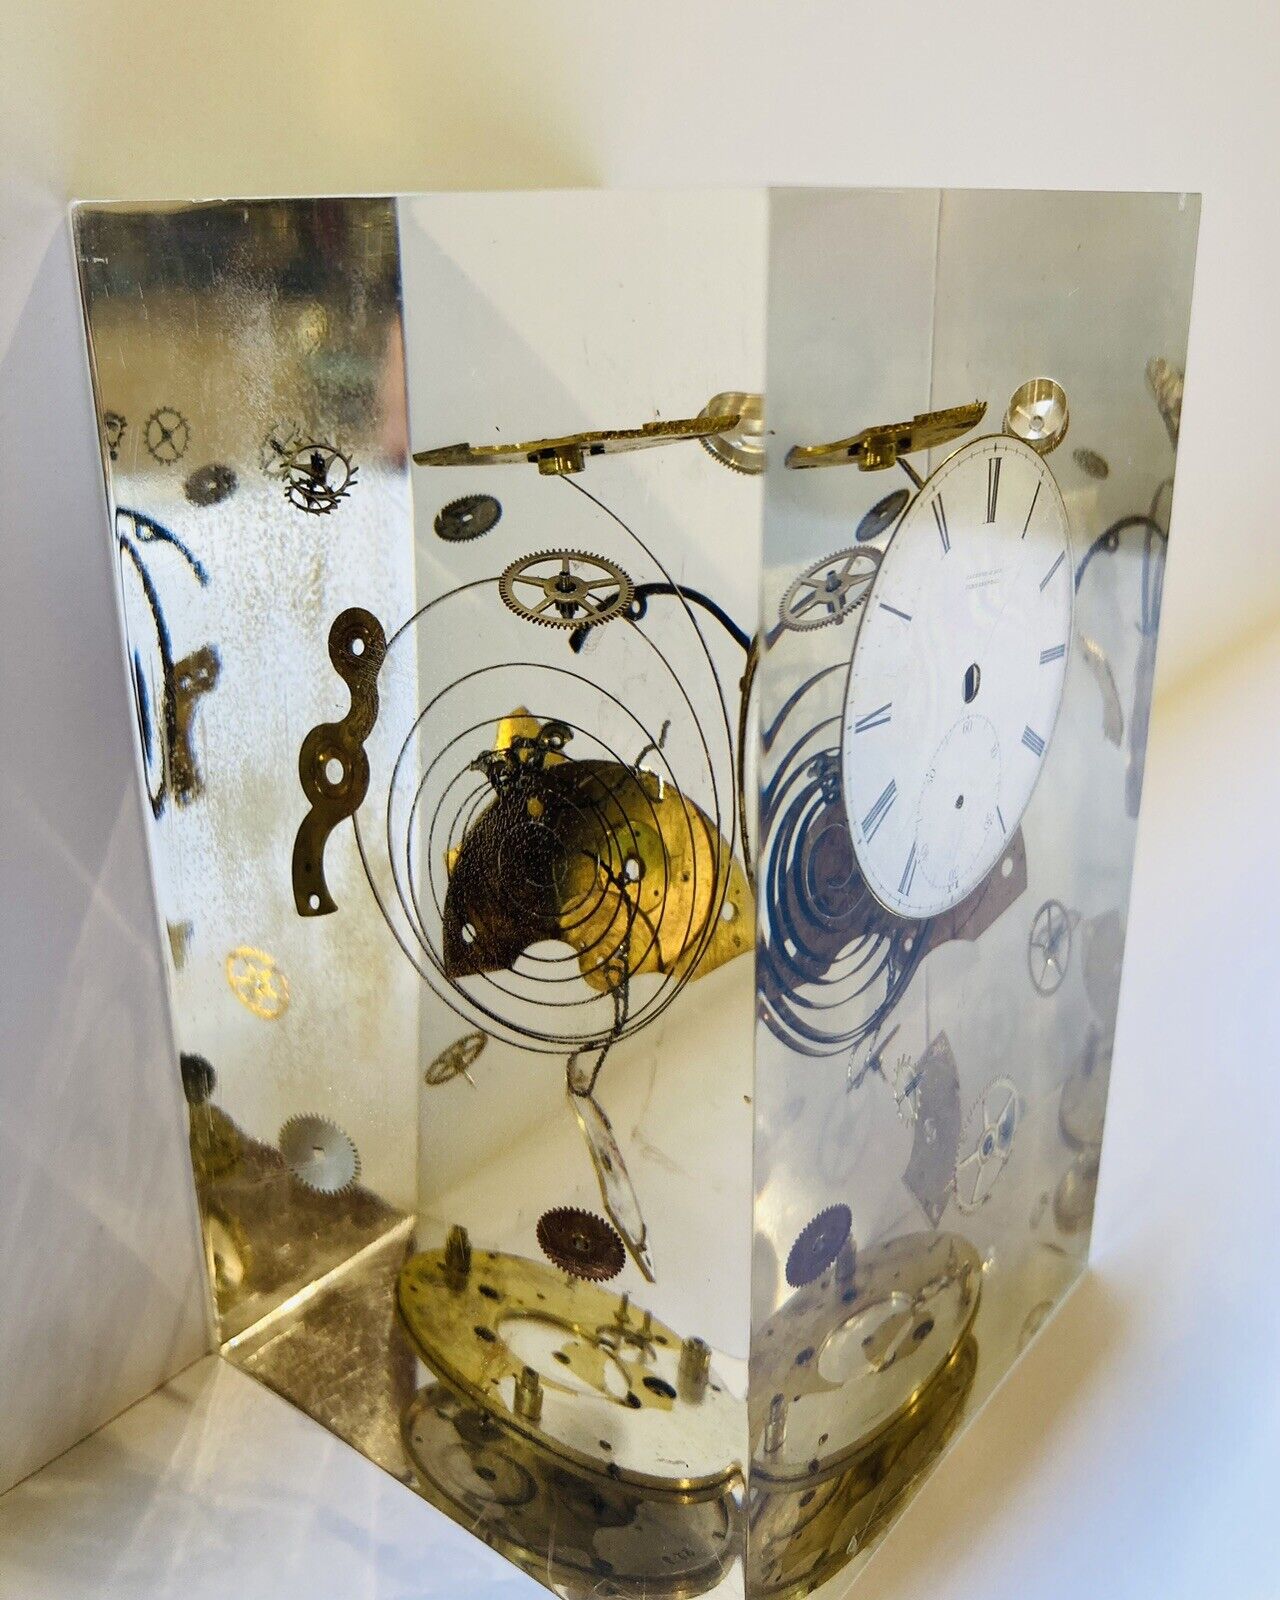 “Disbursement Of Time”Lucite Clock Parts Paperweight Surreal-Steam Punk-Whimsy